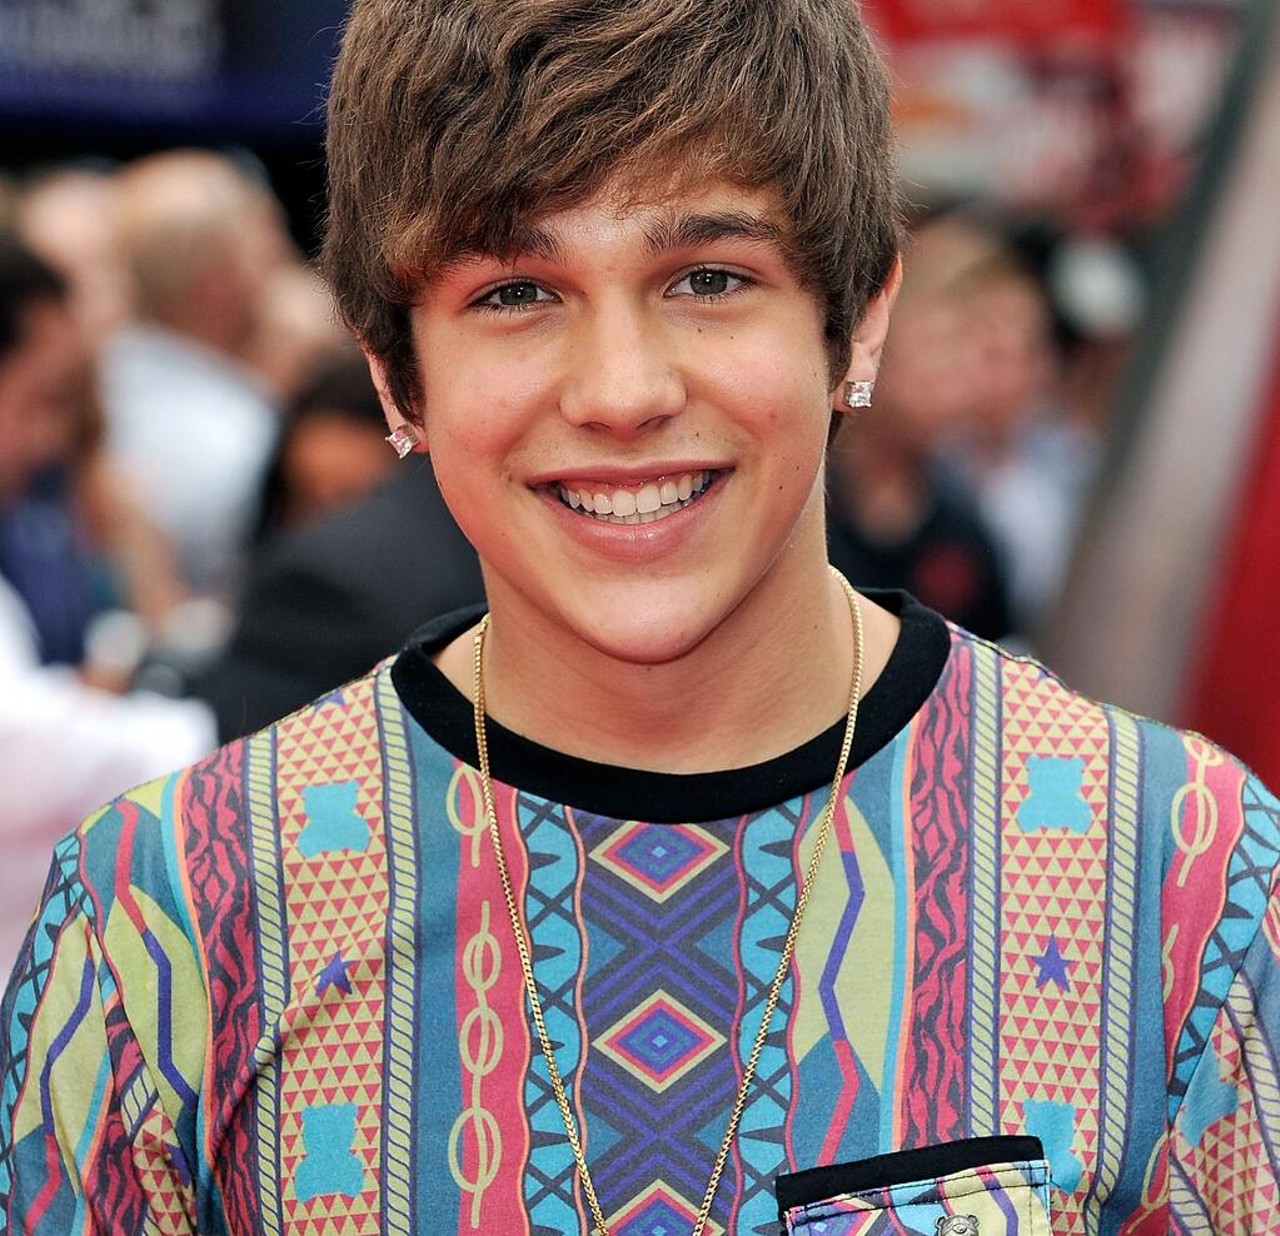 Austin Mahone
At the Royal Oak Music Theatre on March 2
The next Justin Beiber, by all accounts. Poor kid.